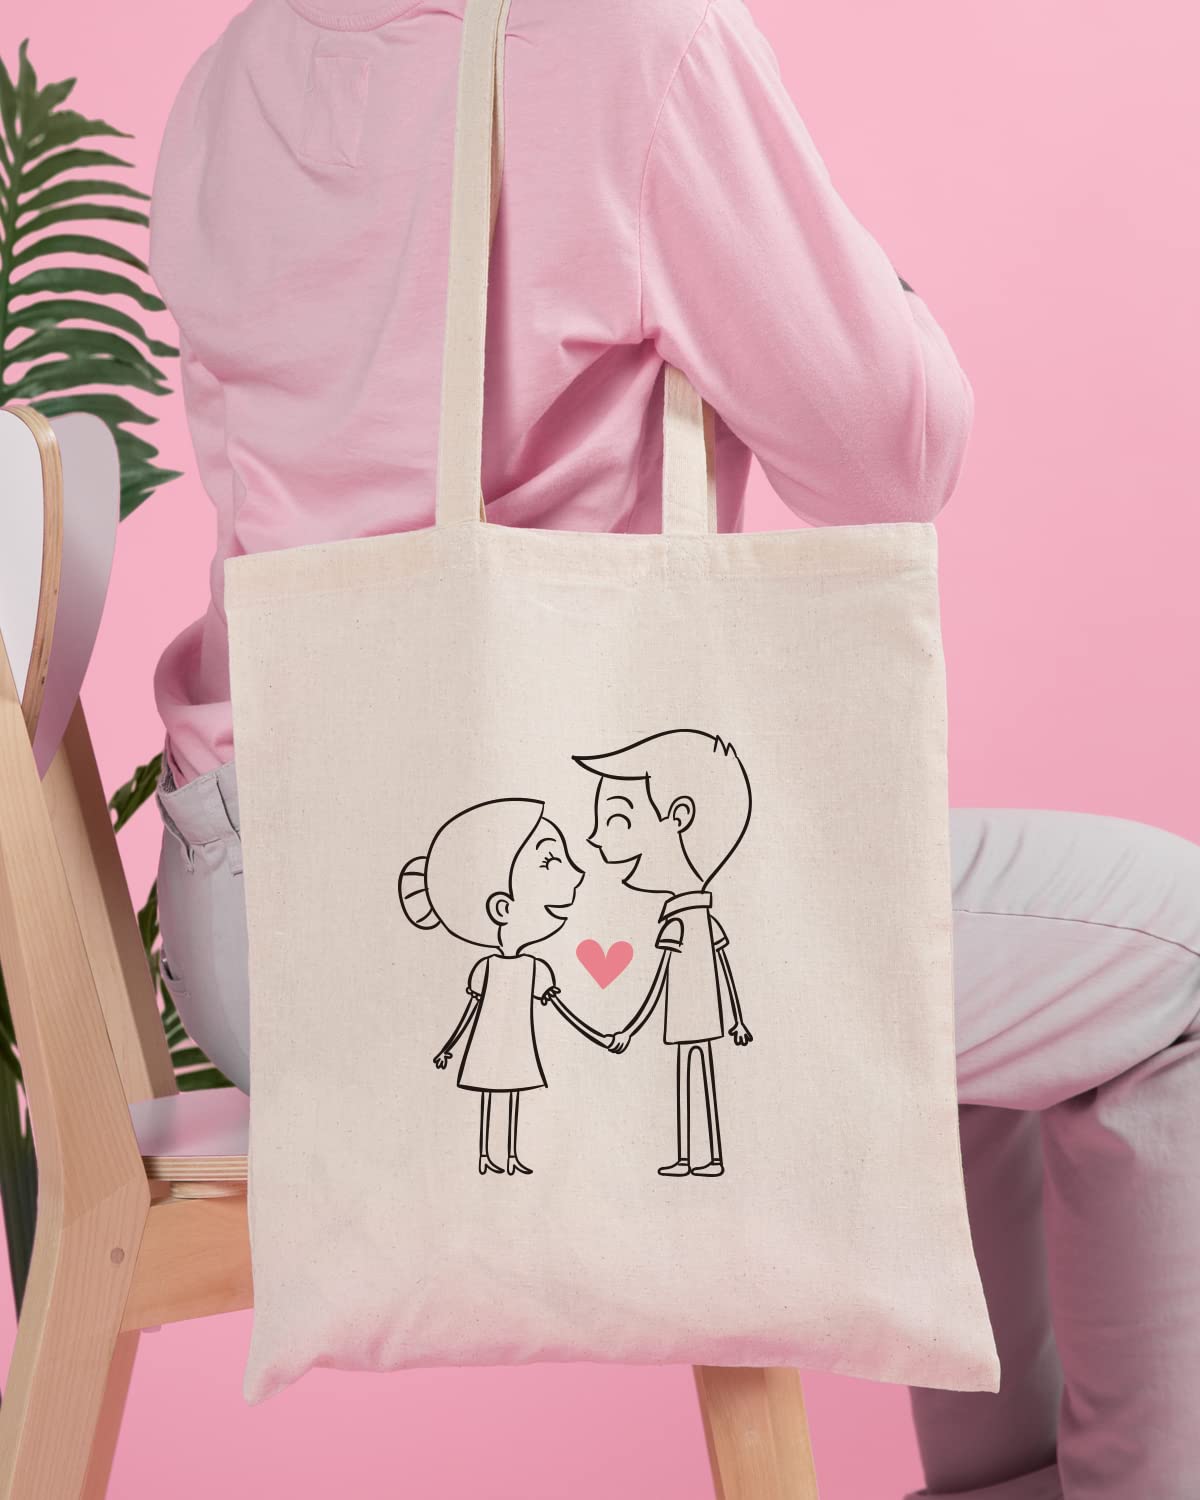 The Pink Magnet Cute Couple Illustration Tote Bag - Canvas Tote Bag for Women | Printed Multipurpose Cotton Bags | Cute Hand Bag for Girls | Best for College, Travel, Grocery | Reusable Shopping Bag | Eco-Friendly Tote Bag